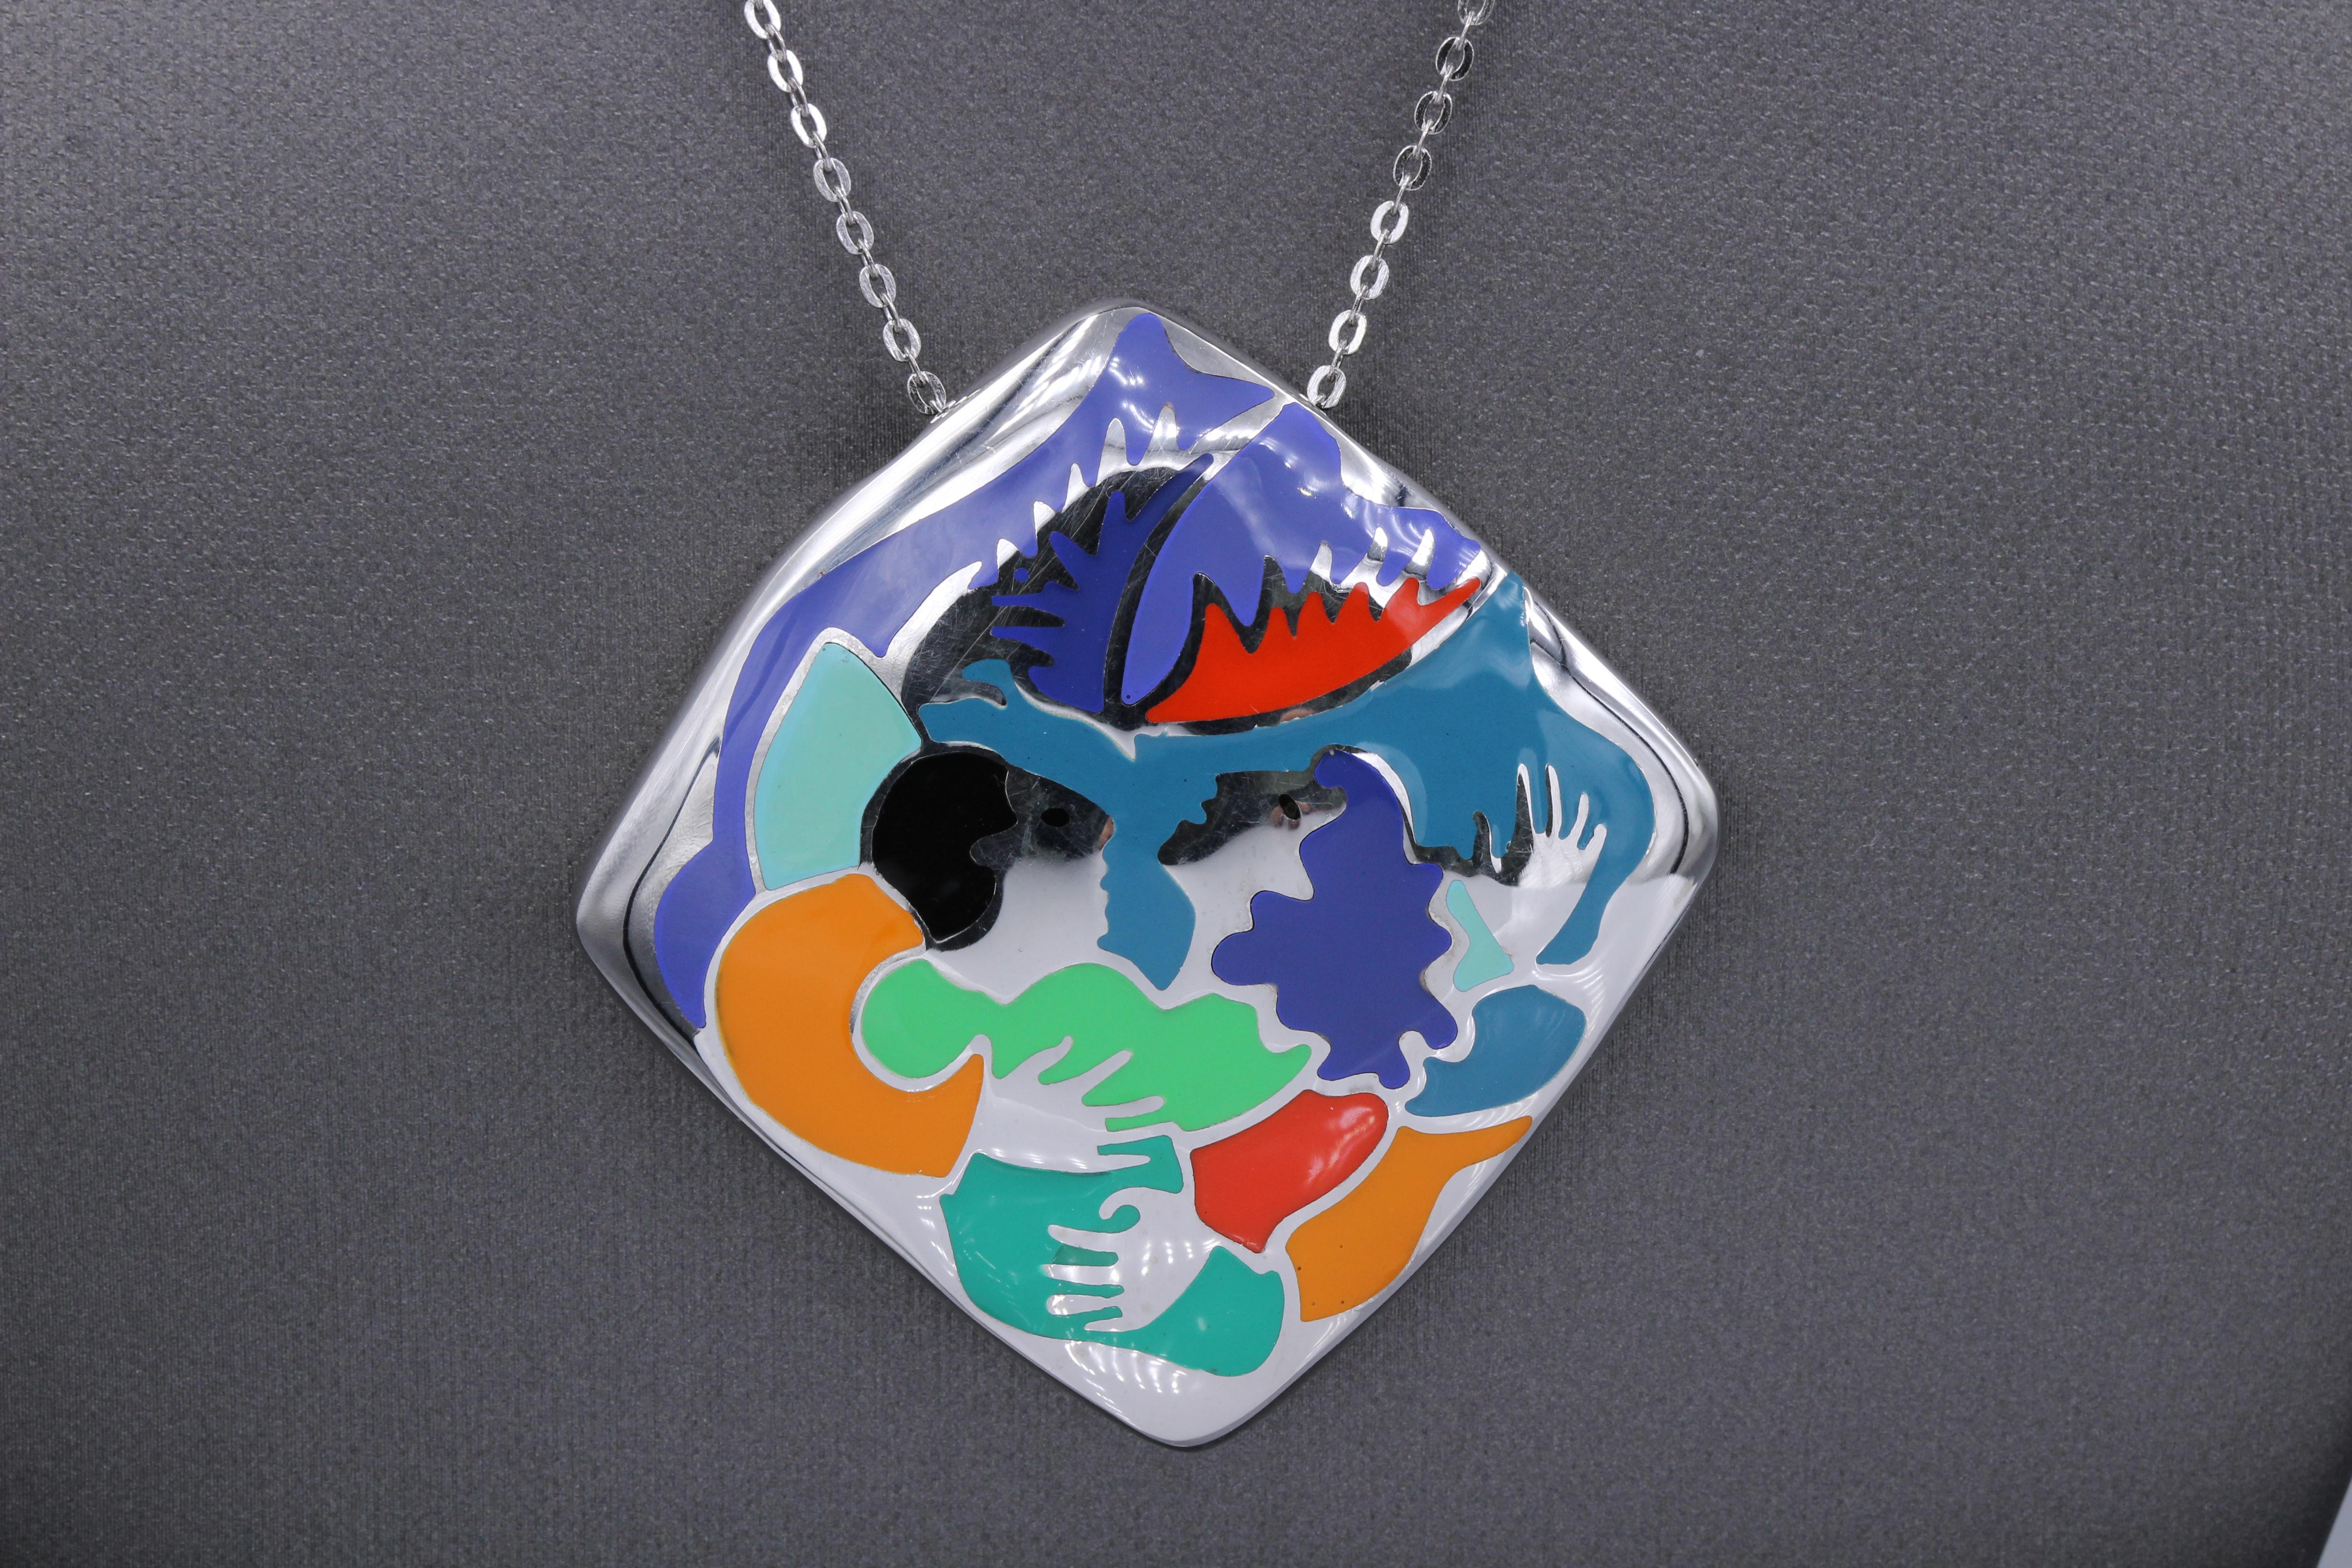 Unique  & beautiful Art Jewelry
Quality made Enamel Art Replica Pendant 
Inspired from famous artist Chagall.
Sterling Silver 925 - Hand Made in Italy
Approx. size 43 x 43 mm ( 1.75' x 1.75' Inch)
Slight Imperfections may exist due to Manufacturing